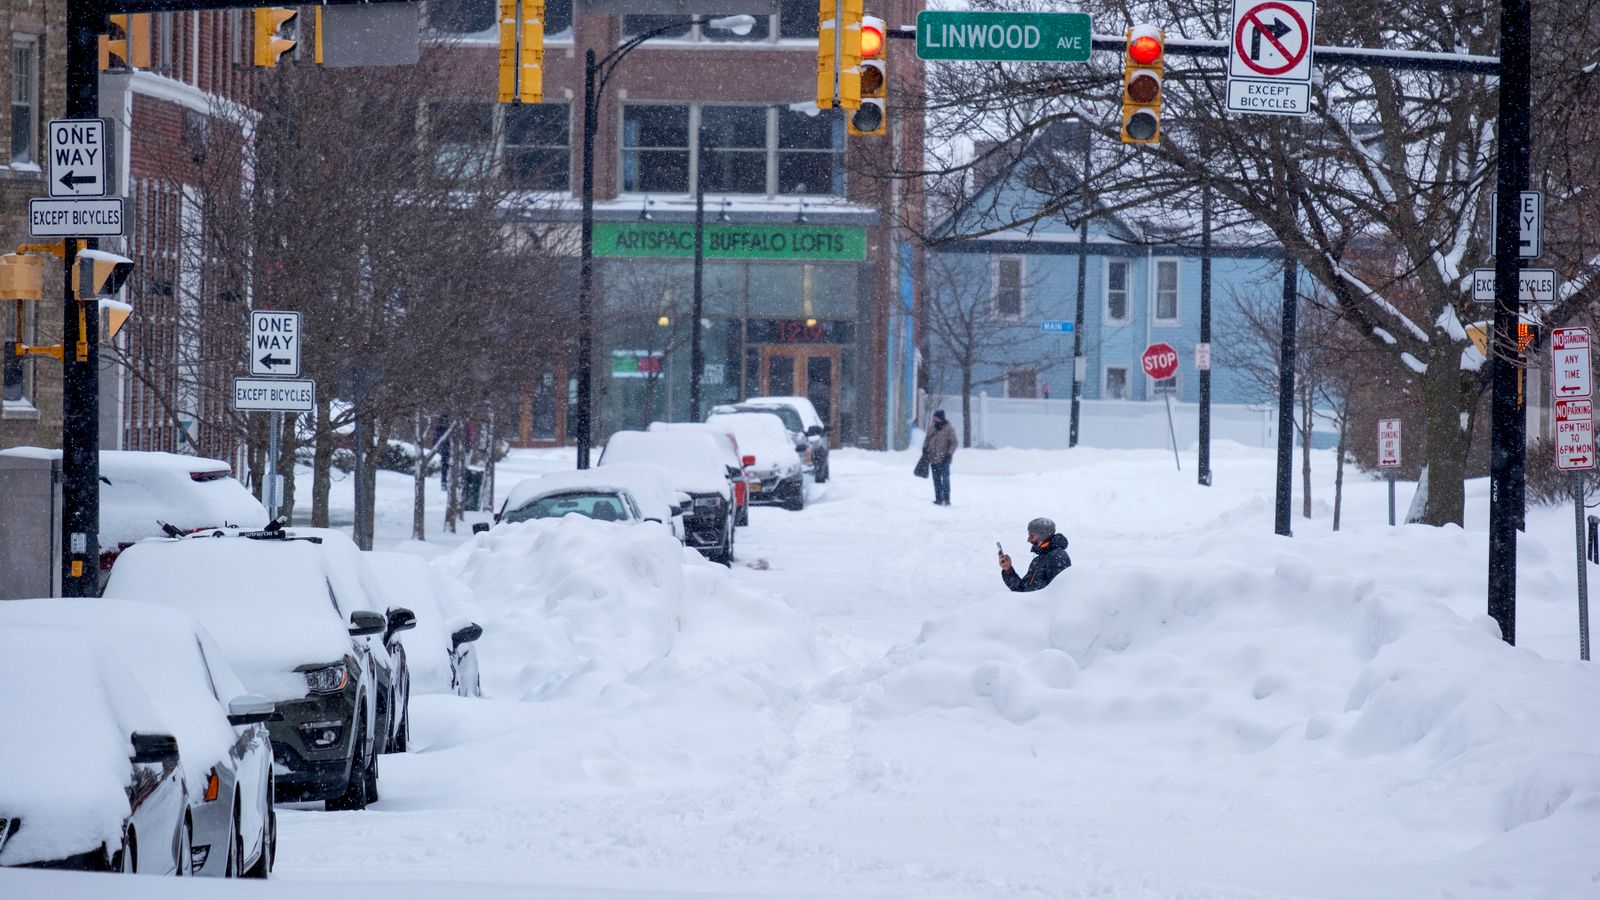 Buffalo snow: What to expect in Toronto